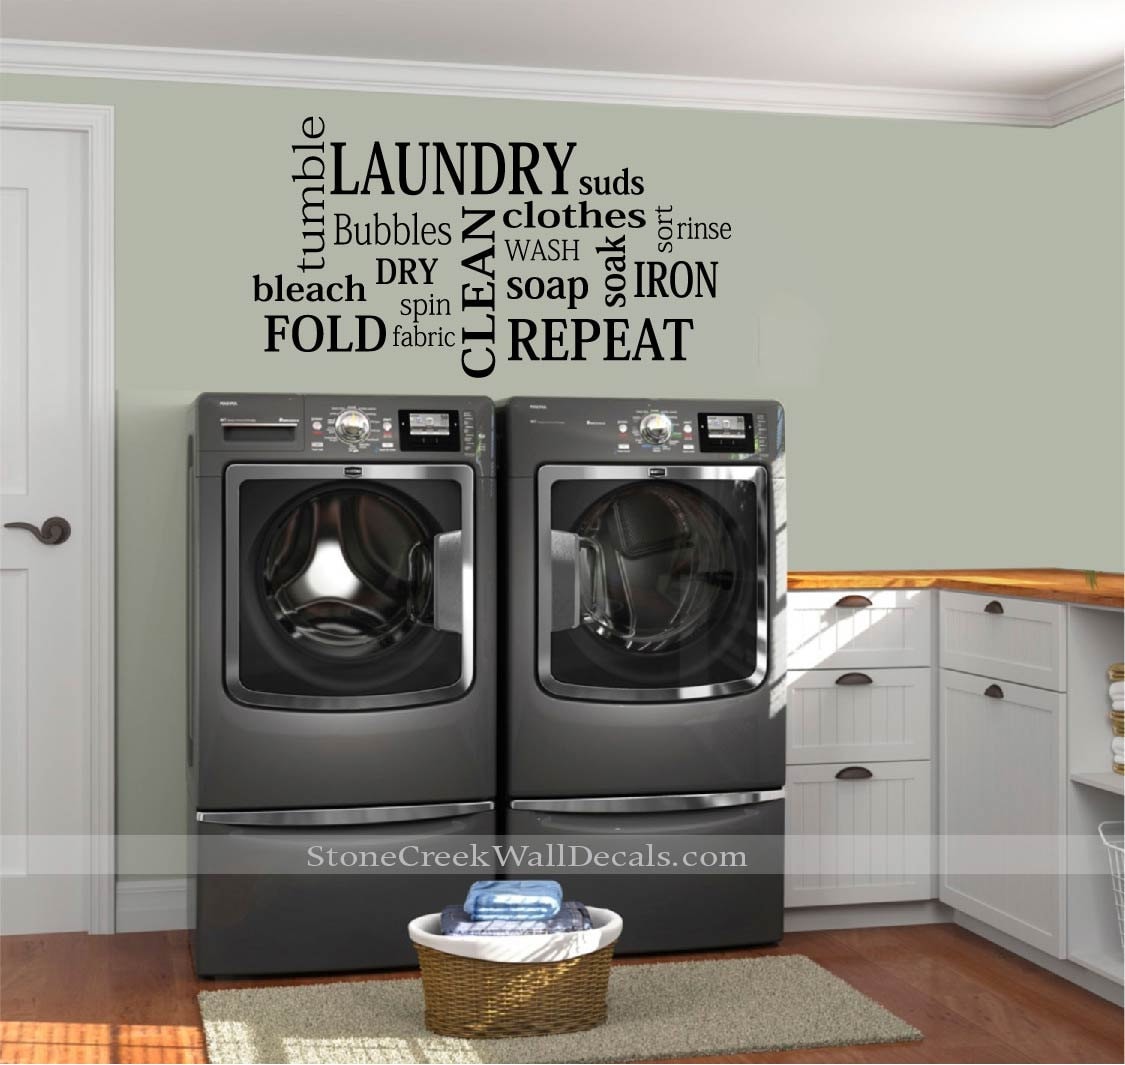 26 COUNTRY SIGNS Wall Decals Stars Laundry Room Bathroom Kitchen Stickers Decor 